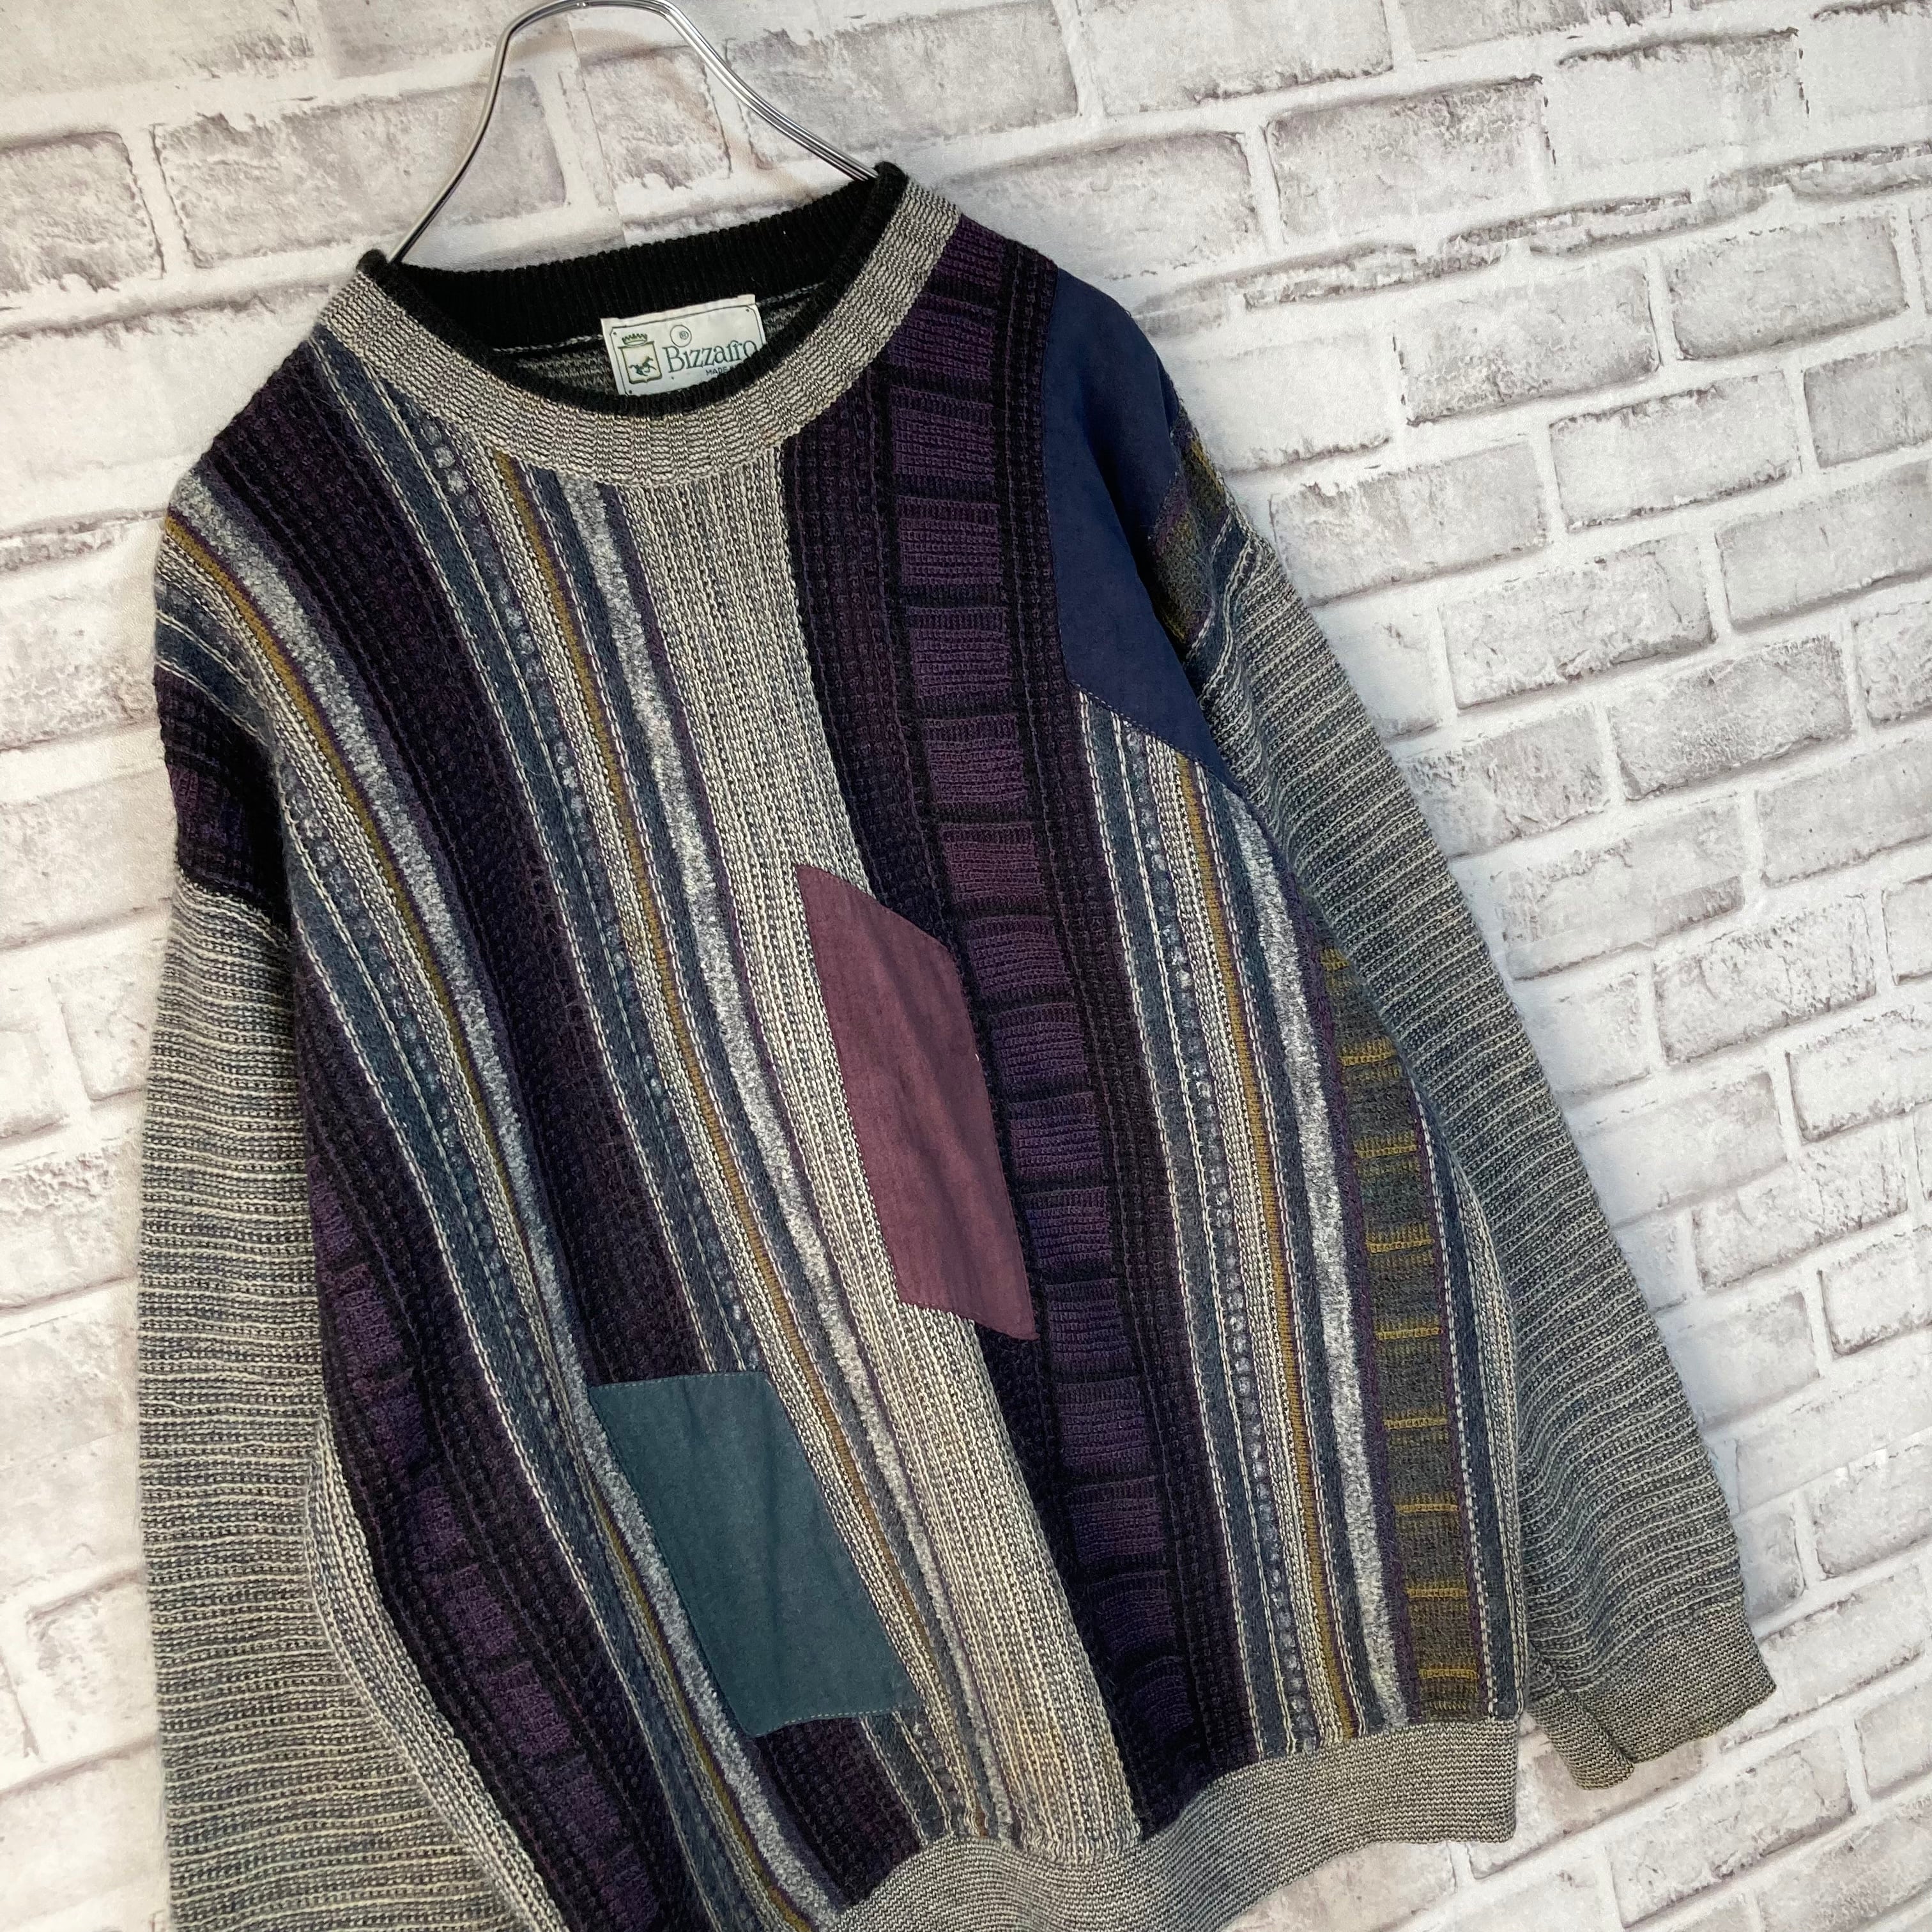 Bizzairo】Design Knit L相当 Made in ITALY “EURO LINE” デザイン